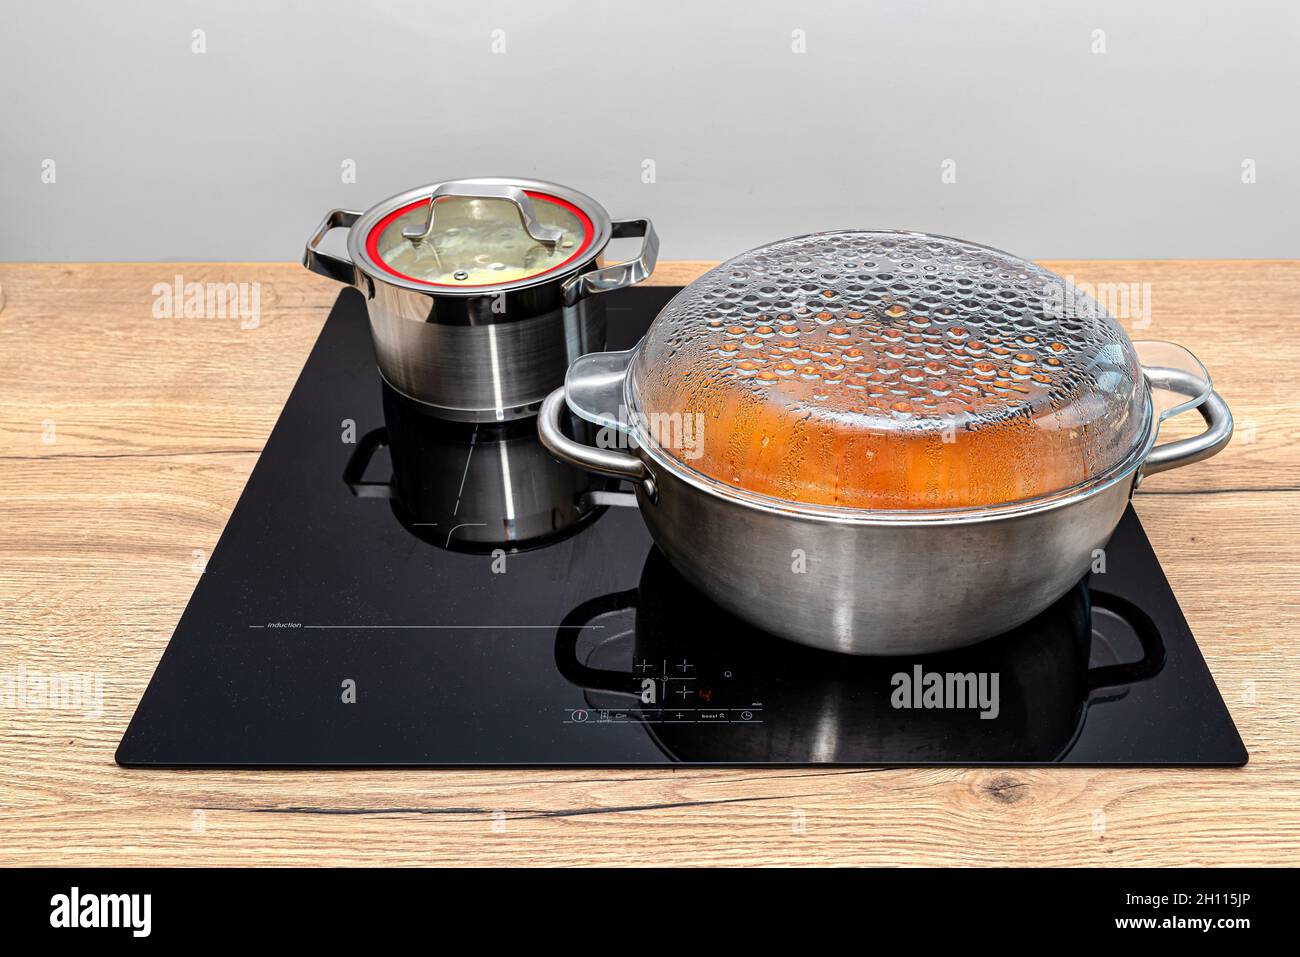 https://c8.alamy.com/comp/2H115JP/steel-pots-with-a-cooking-dish-on-an-induction-cooker-built-into-the-kitchen-worktop-on-the-cabinets-2H115JP.jpg